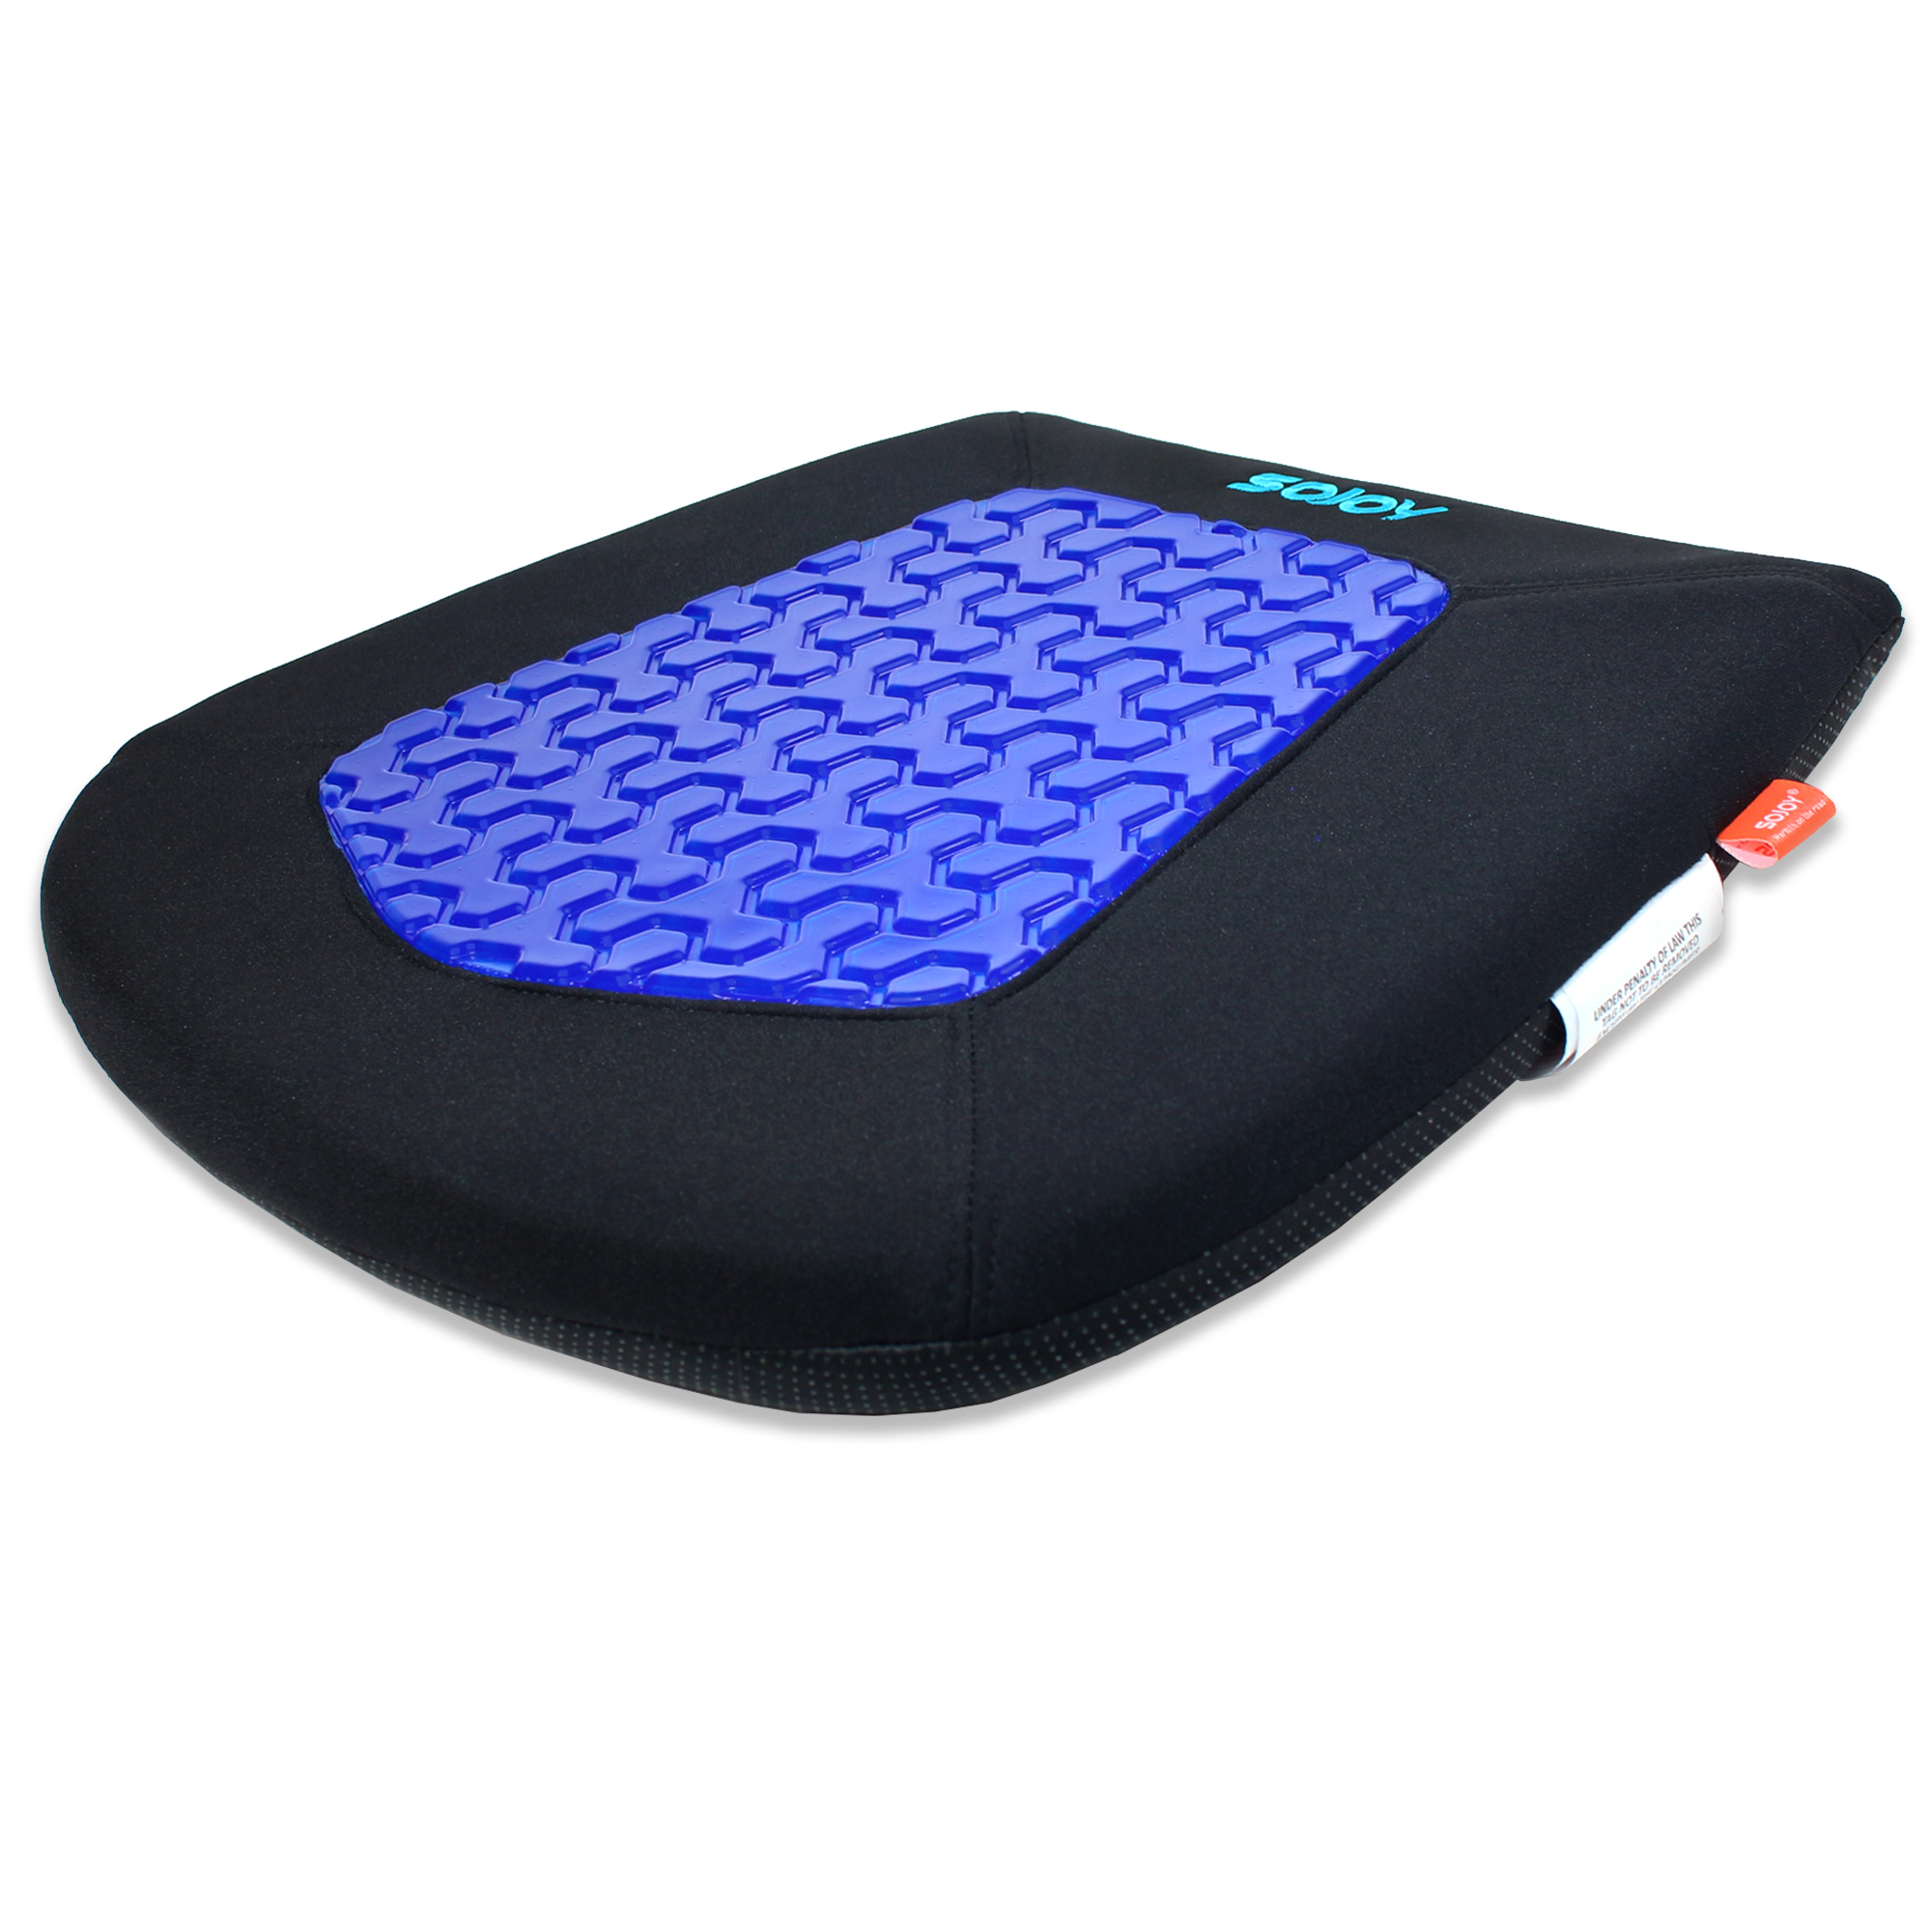 Sojoy Purple Gel Seat Cushion and Lumbar Support Pillow - Online Shopping  for Car Heated Blankets,Heated Seat Cushion,Car Gel Cushions,Free Shipping